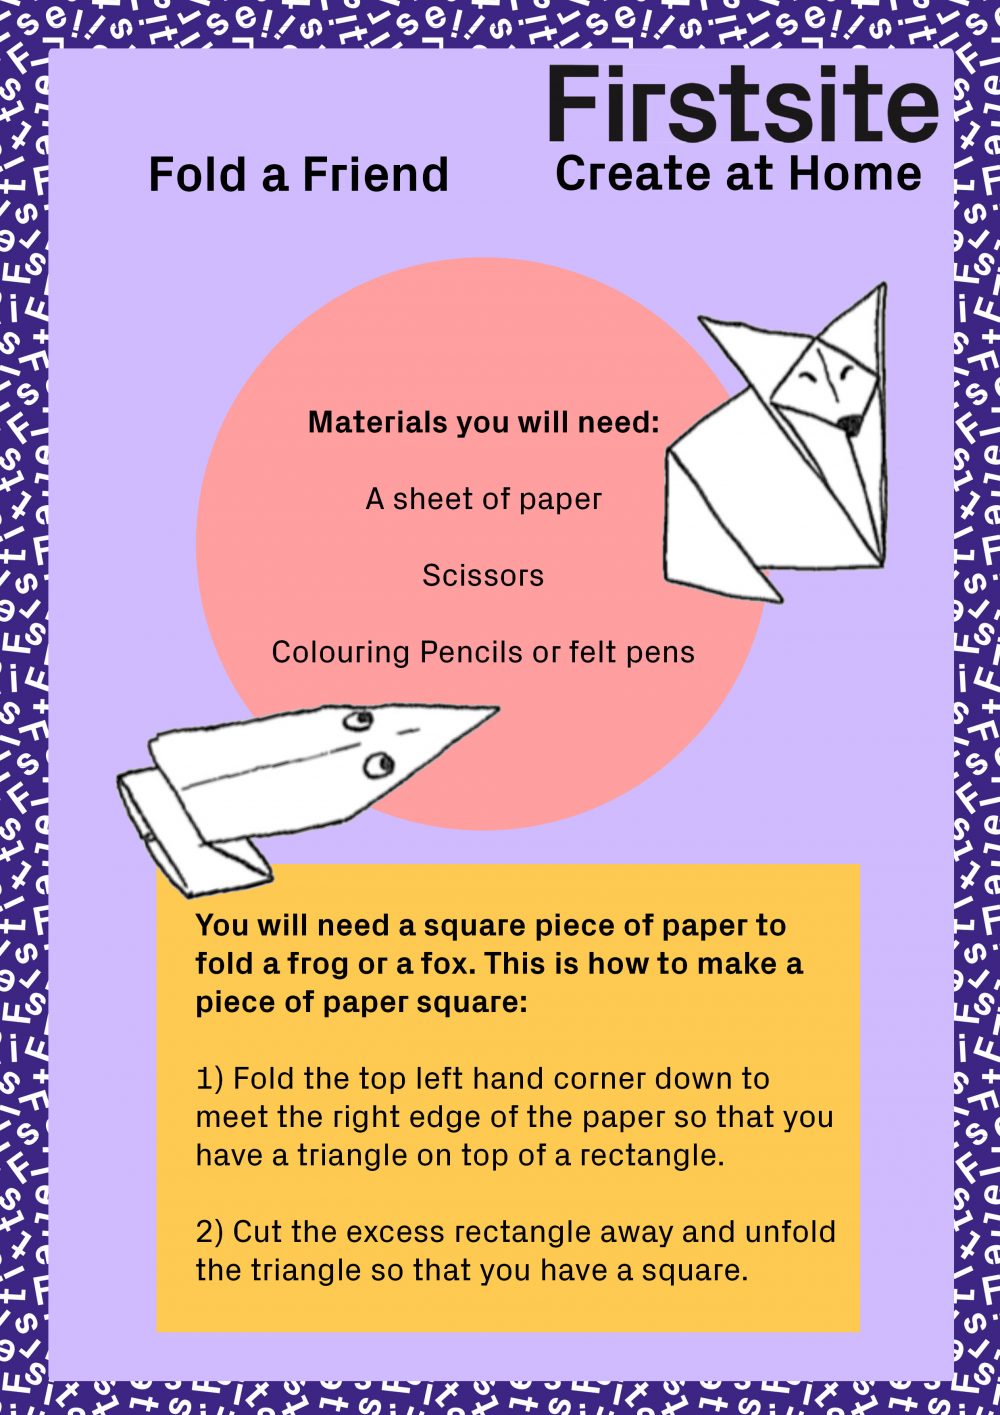 Firstsite Create at Home Fold a Friend Instructions pg 1 of 5